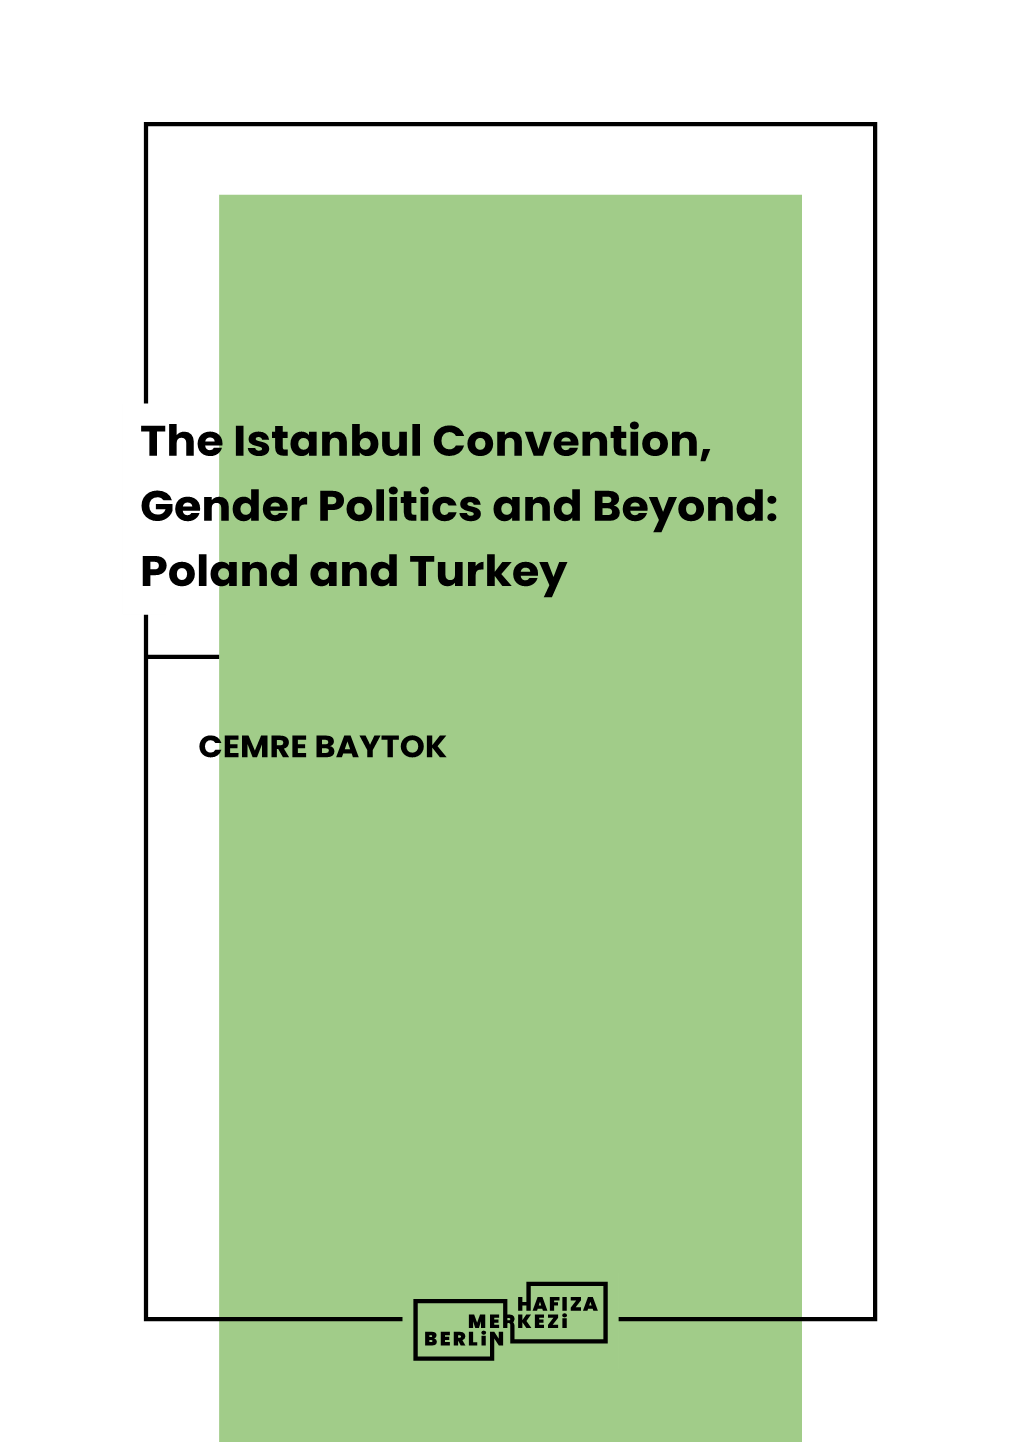 The Istanbul Convention, Gender Politics and Beyond: Poland and Turkey